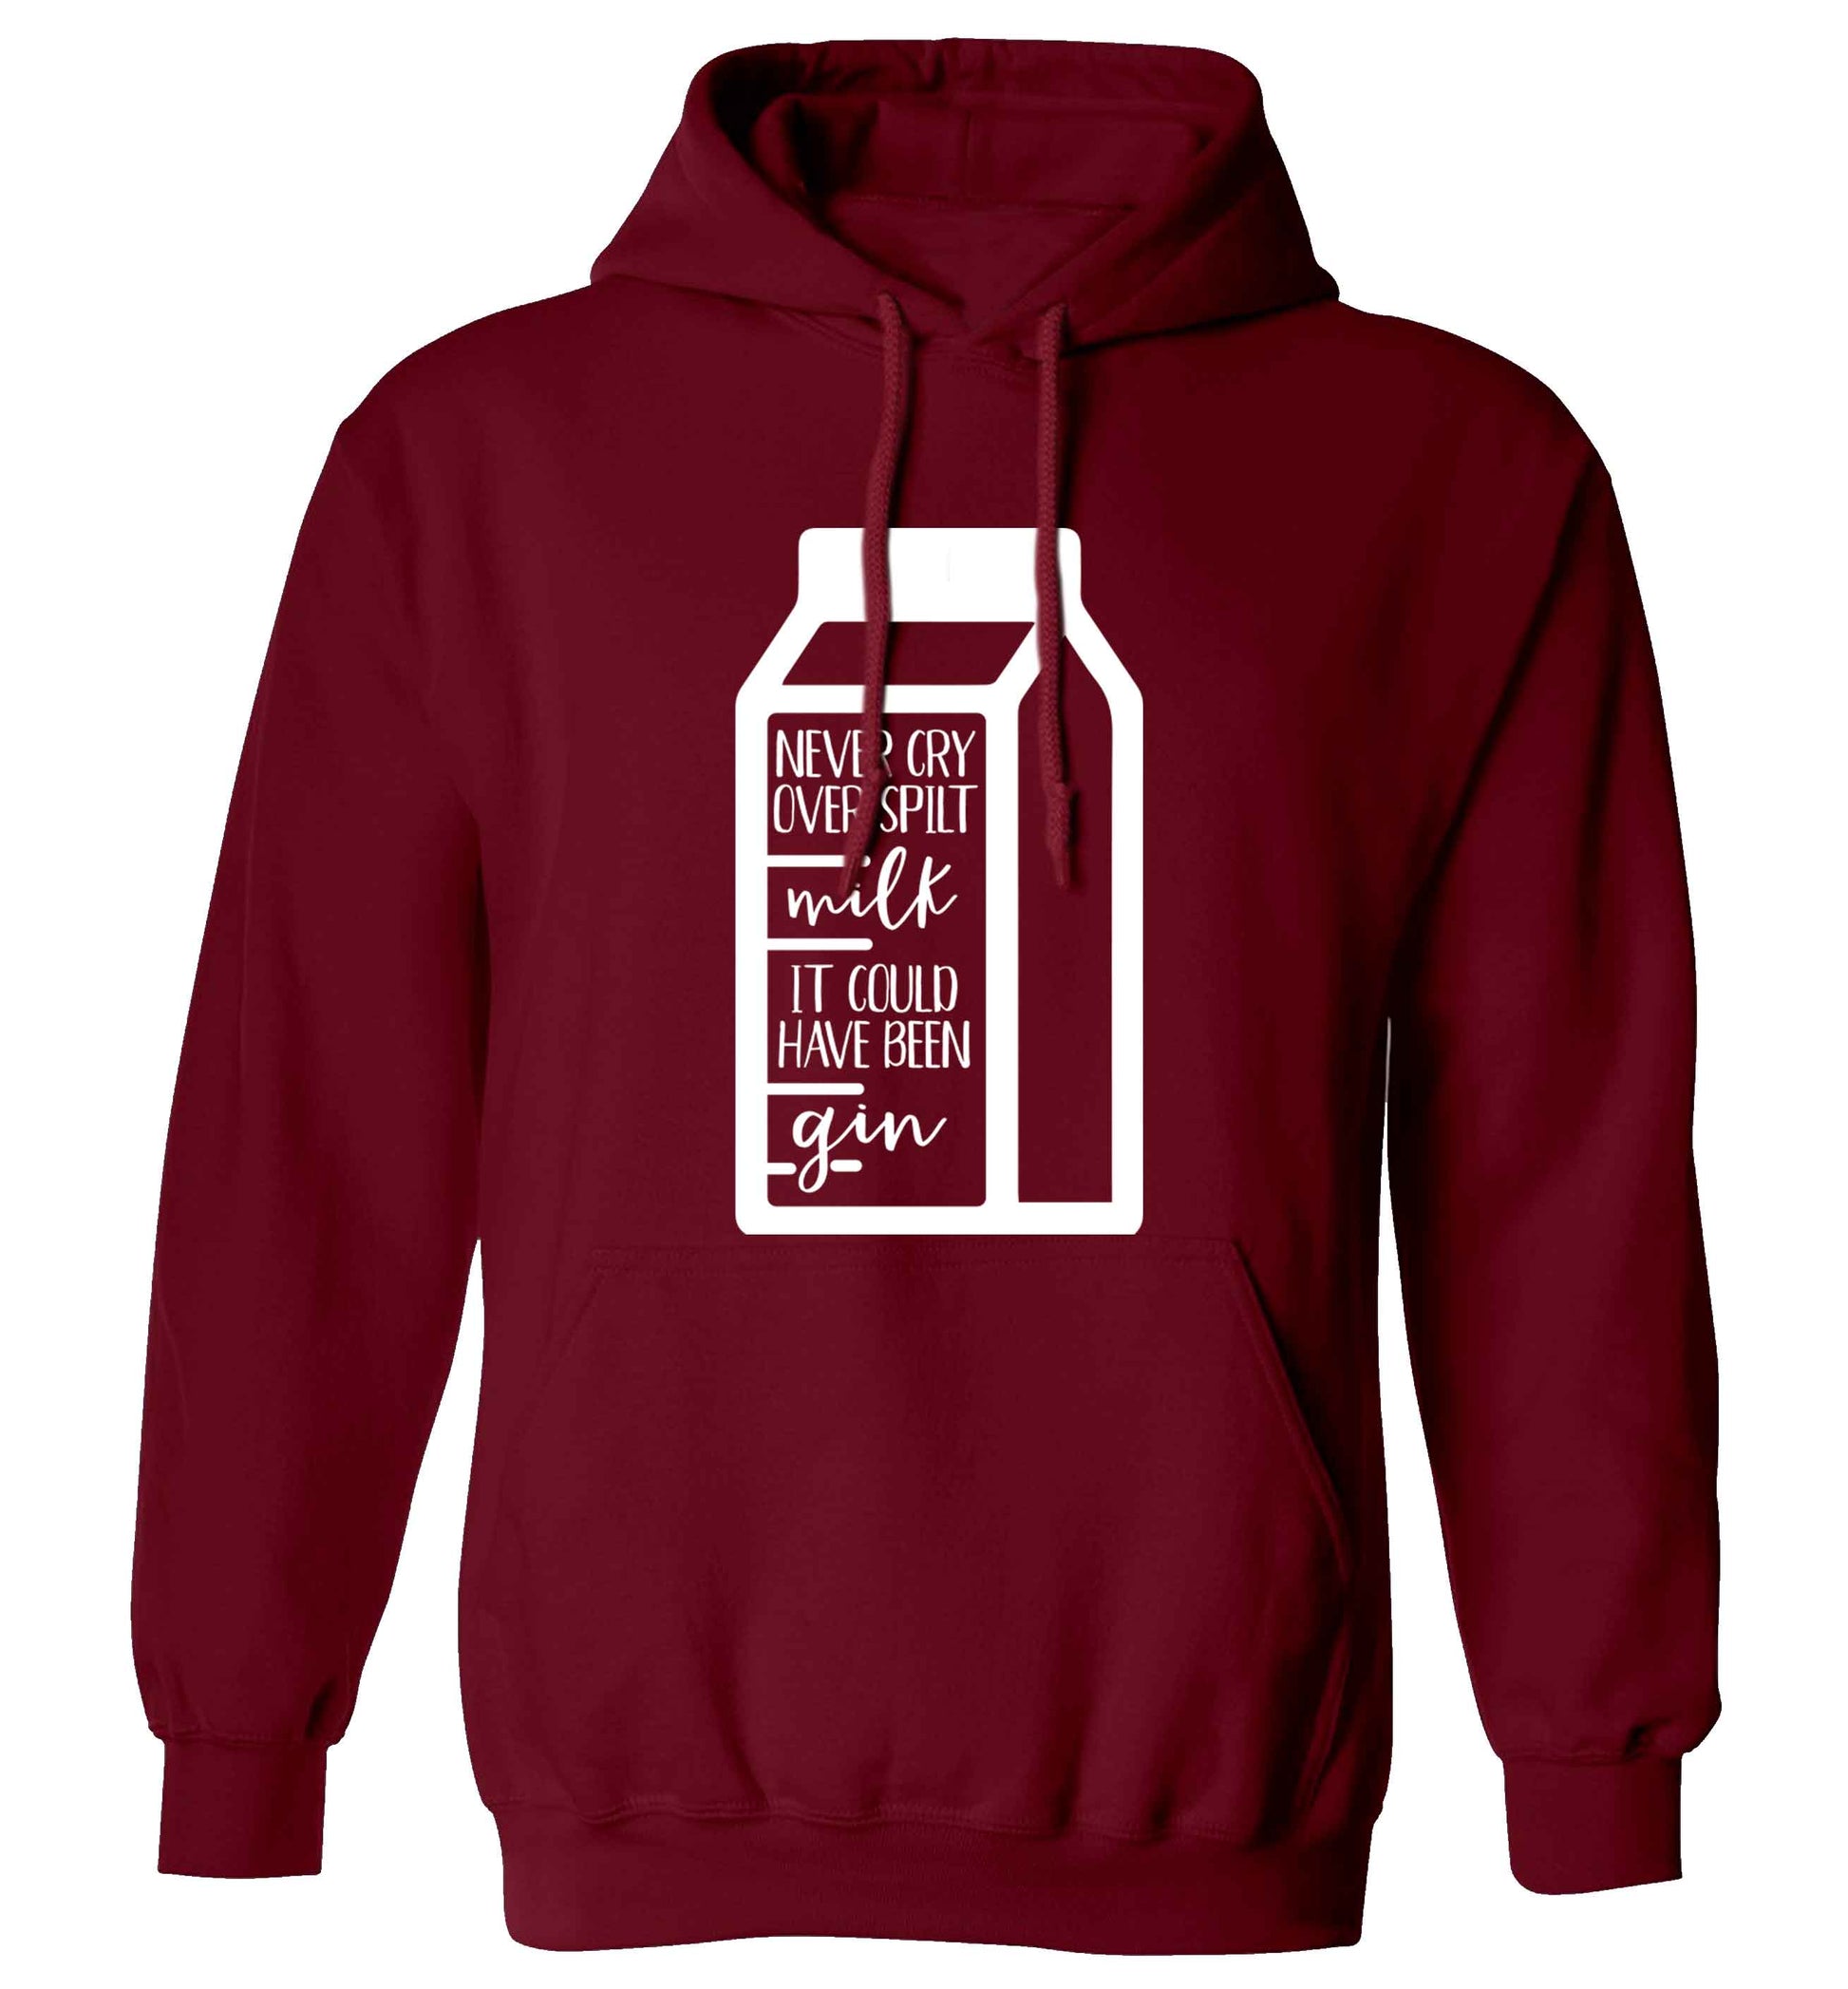 Never cry over spilt milk, it could have been gin adults unisex maroon hoodie 2XL